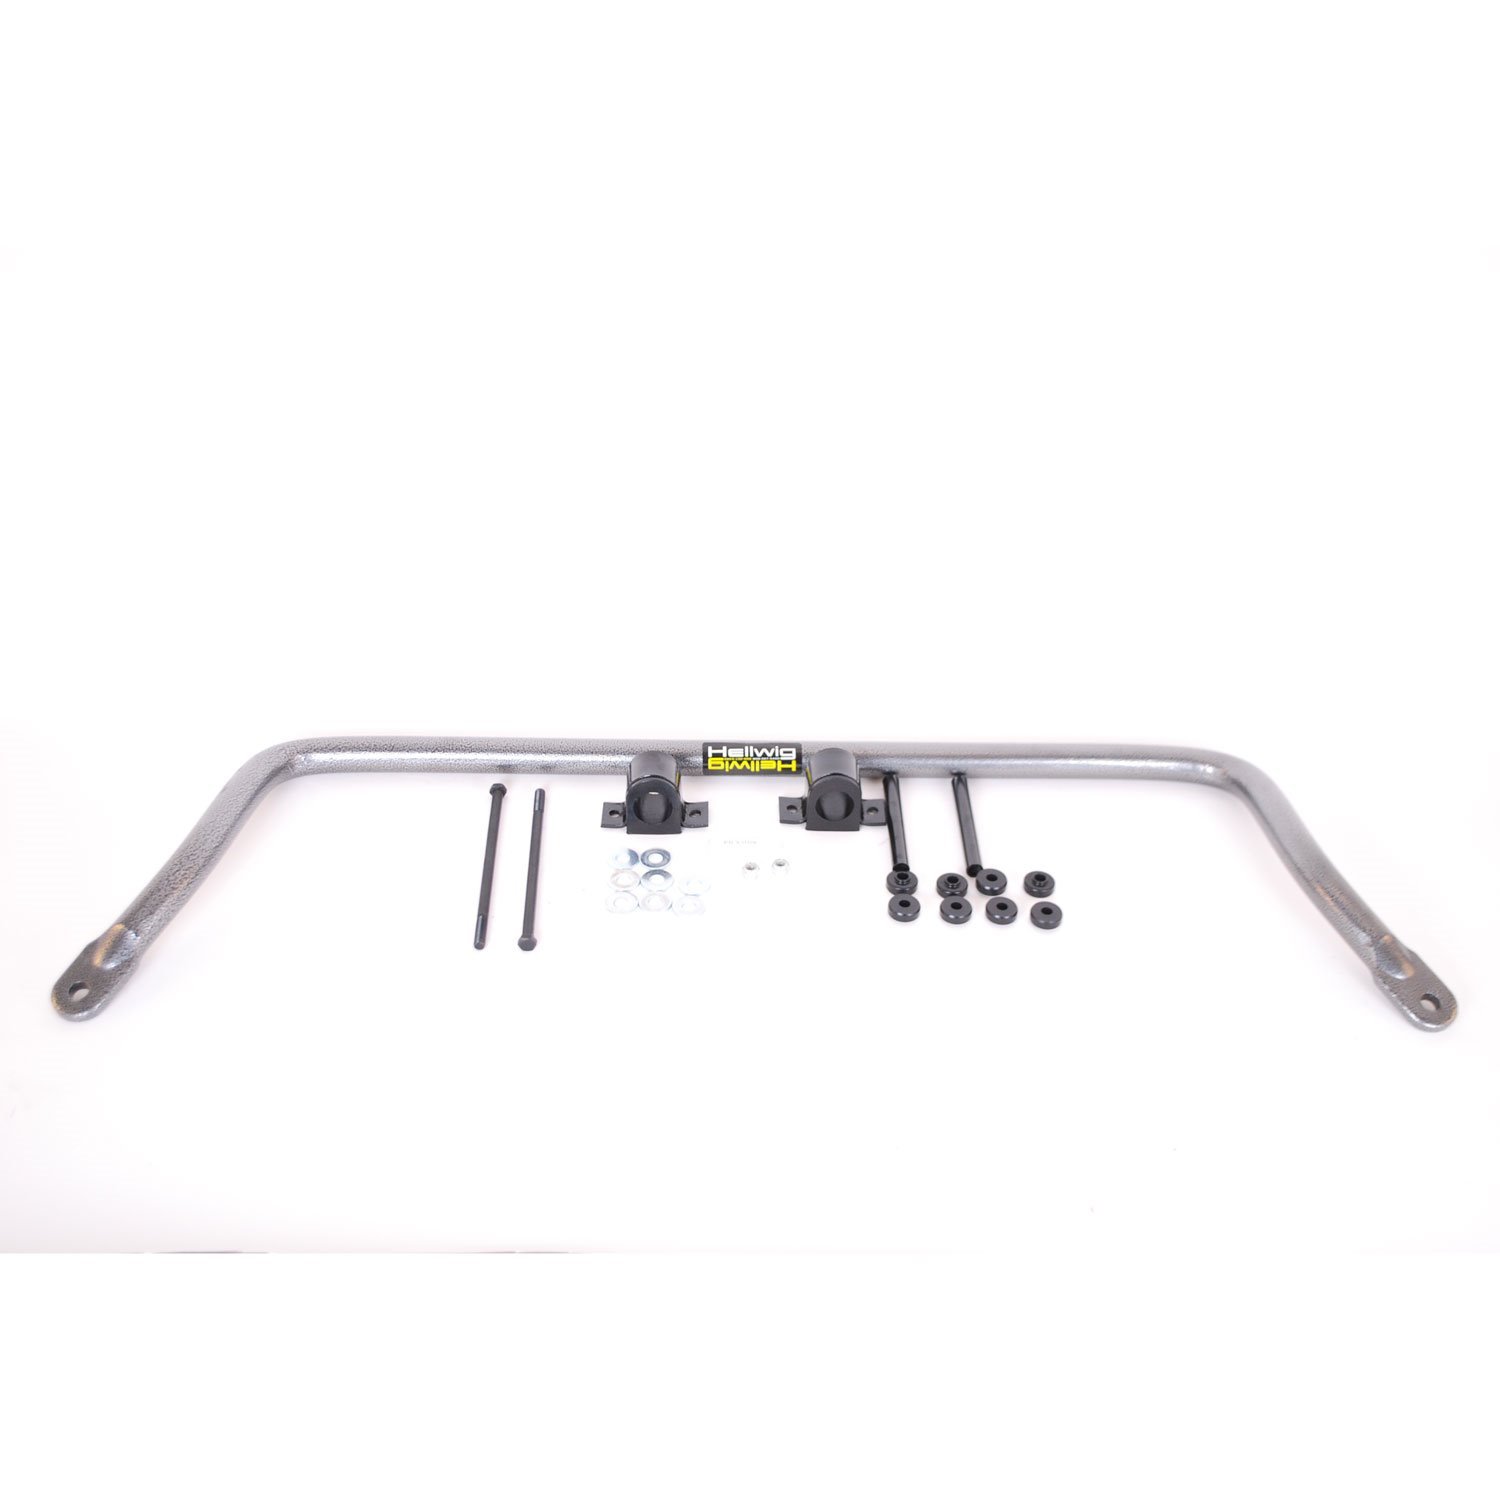 Front Sway Bar for 2001-2006 Chevy/GMC 1500HD 2WD and 2001-2010 Chevy/GMC 2500HD/3500HD 2/4WD